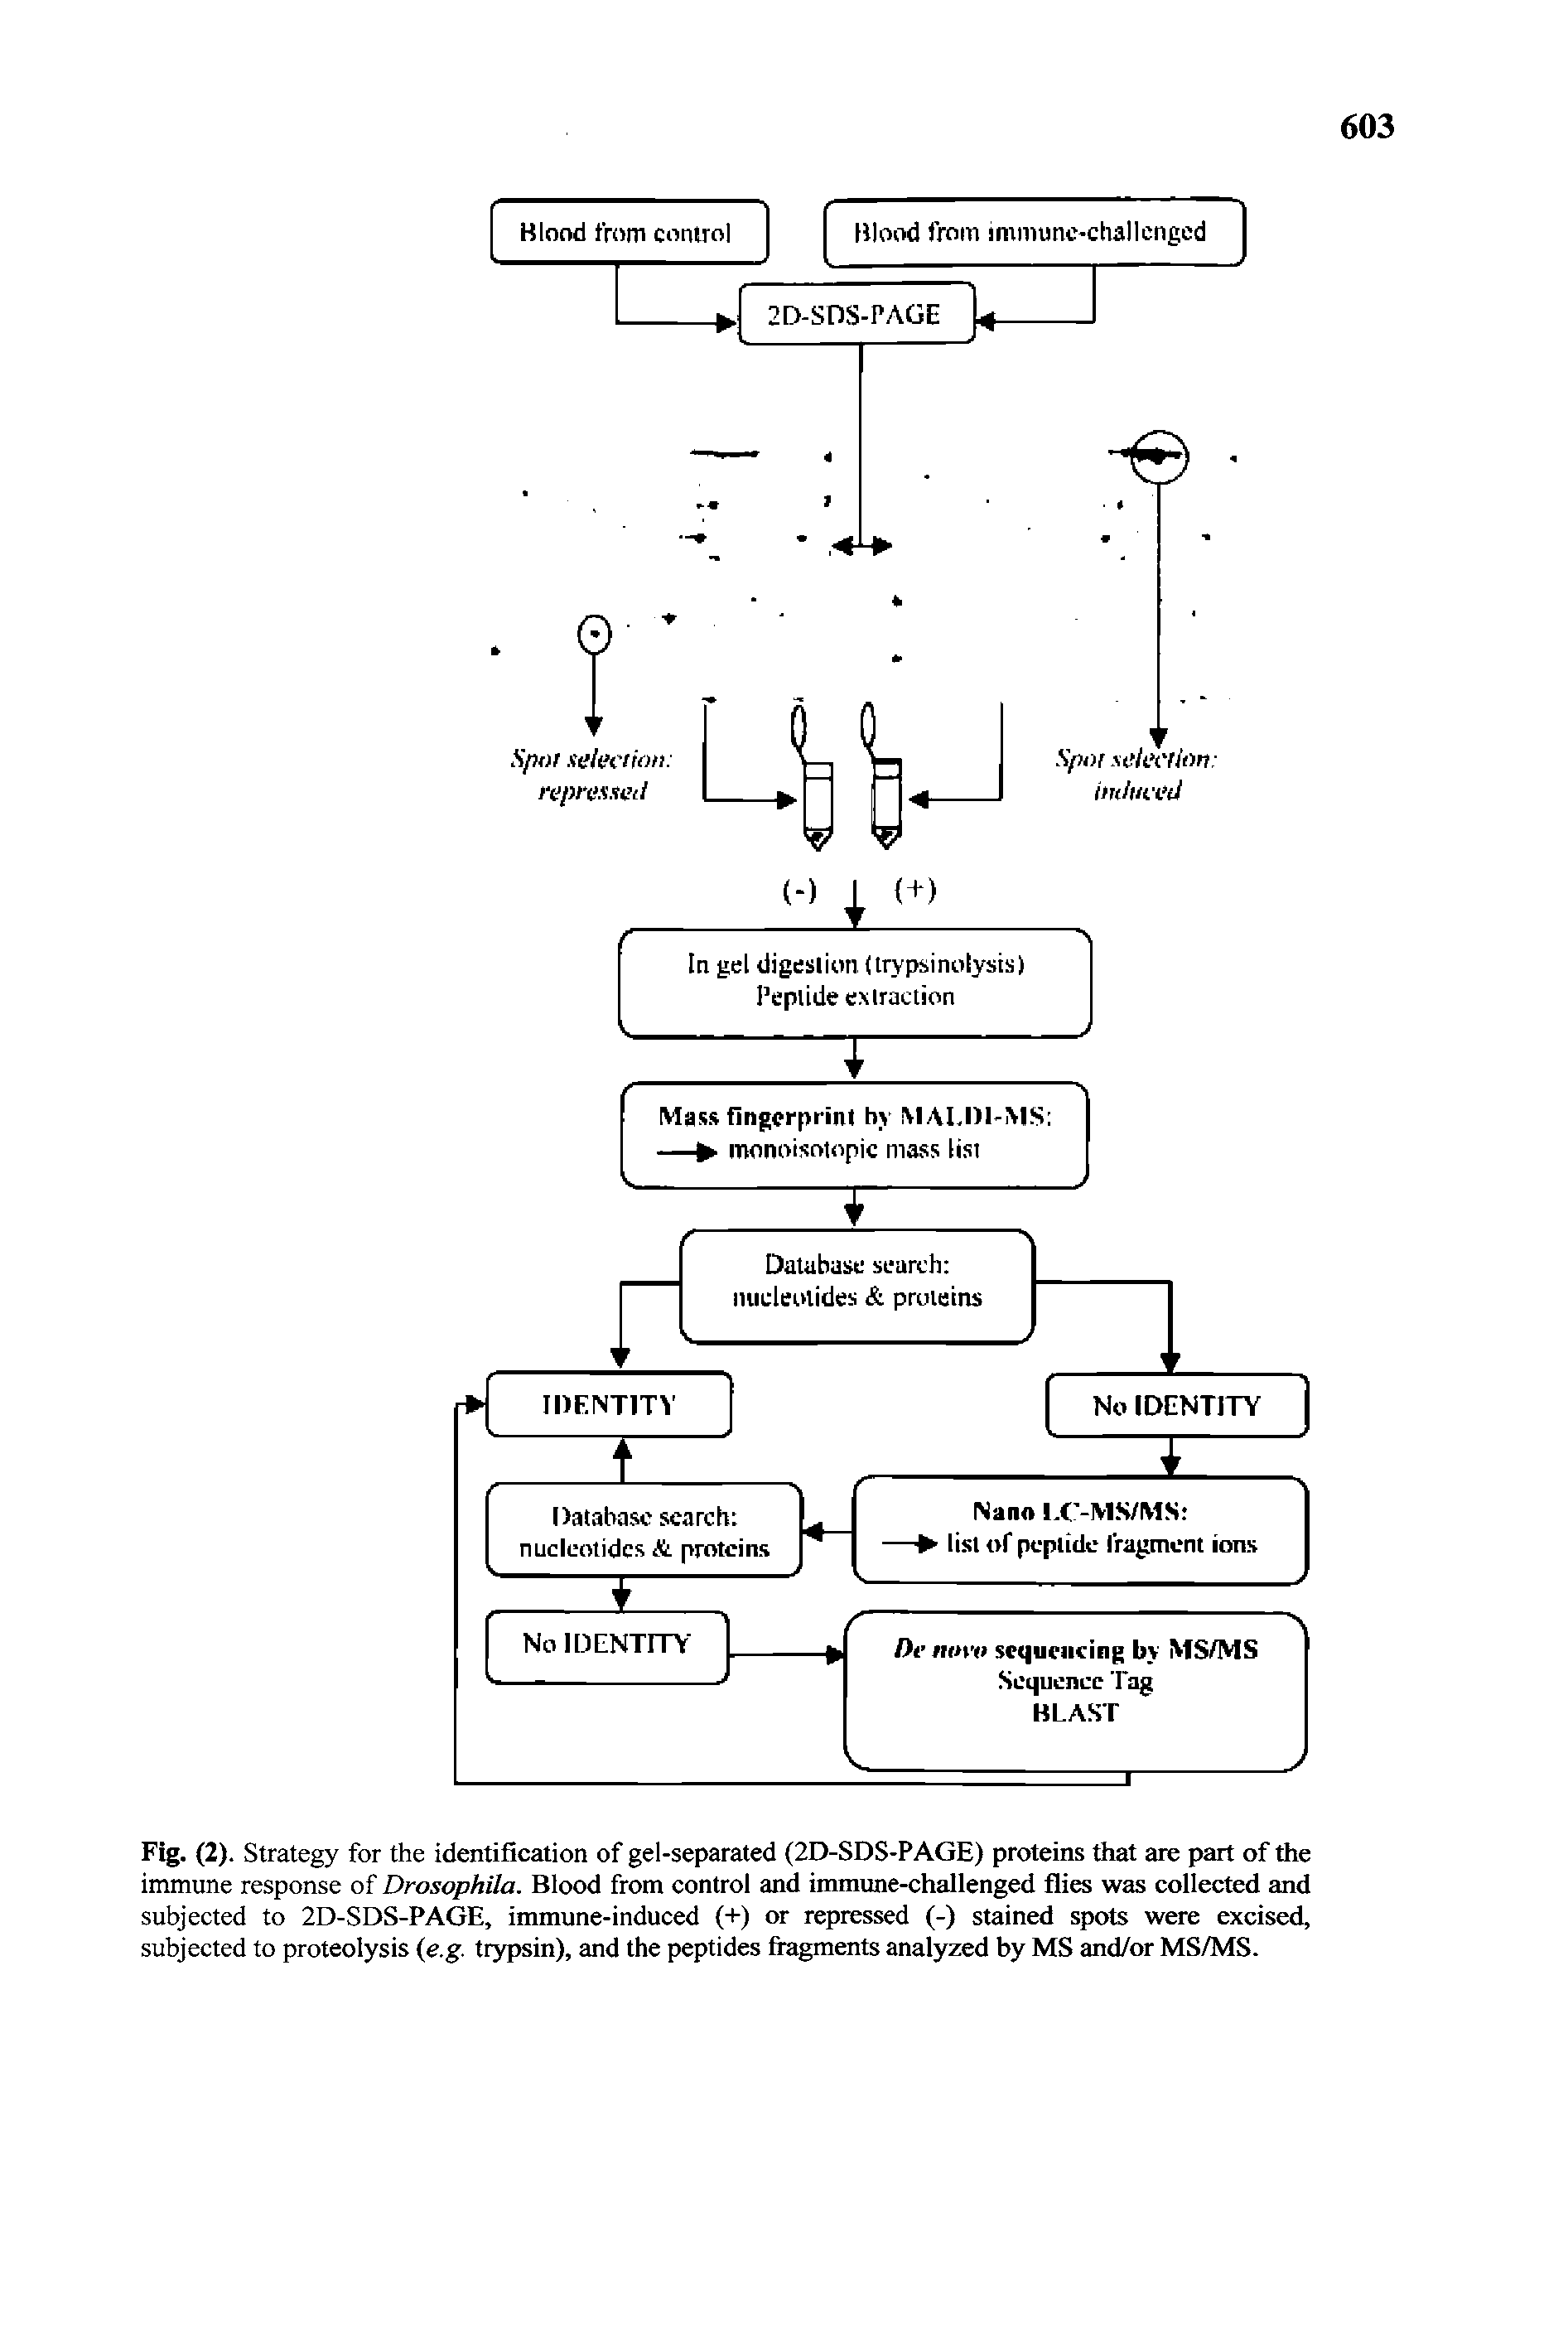 Fig. (2). Strategy for the identification of gel-separated (2D-SDS-PAGE) proteins that are part of the immune response of Drosophila. Blood from control and immune-challenged flies was collected and subjected to 2D-SDS-PAGE, immune-induced (-I-) or repressed (-) stained spots were excised, subjected to proteolysis e.g. trypsin), and the peptides fragments analyzed by MS and/or MS/MS.